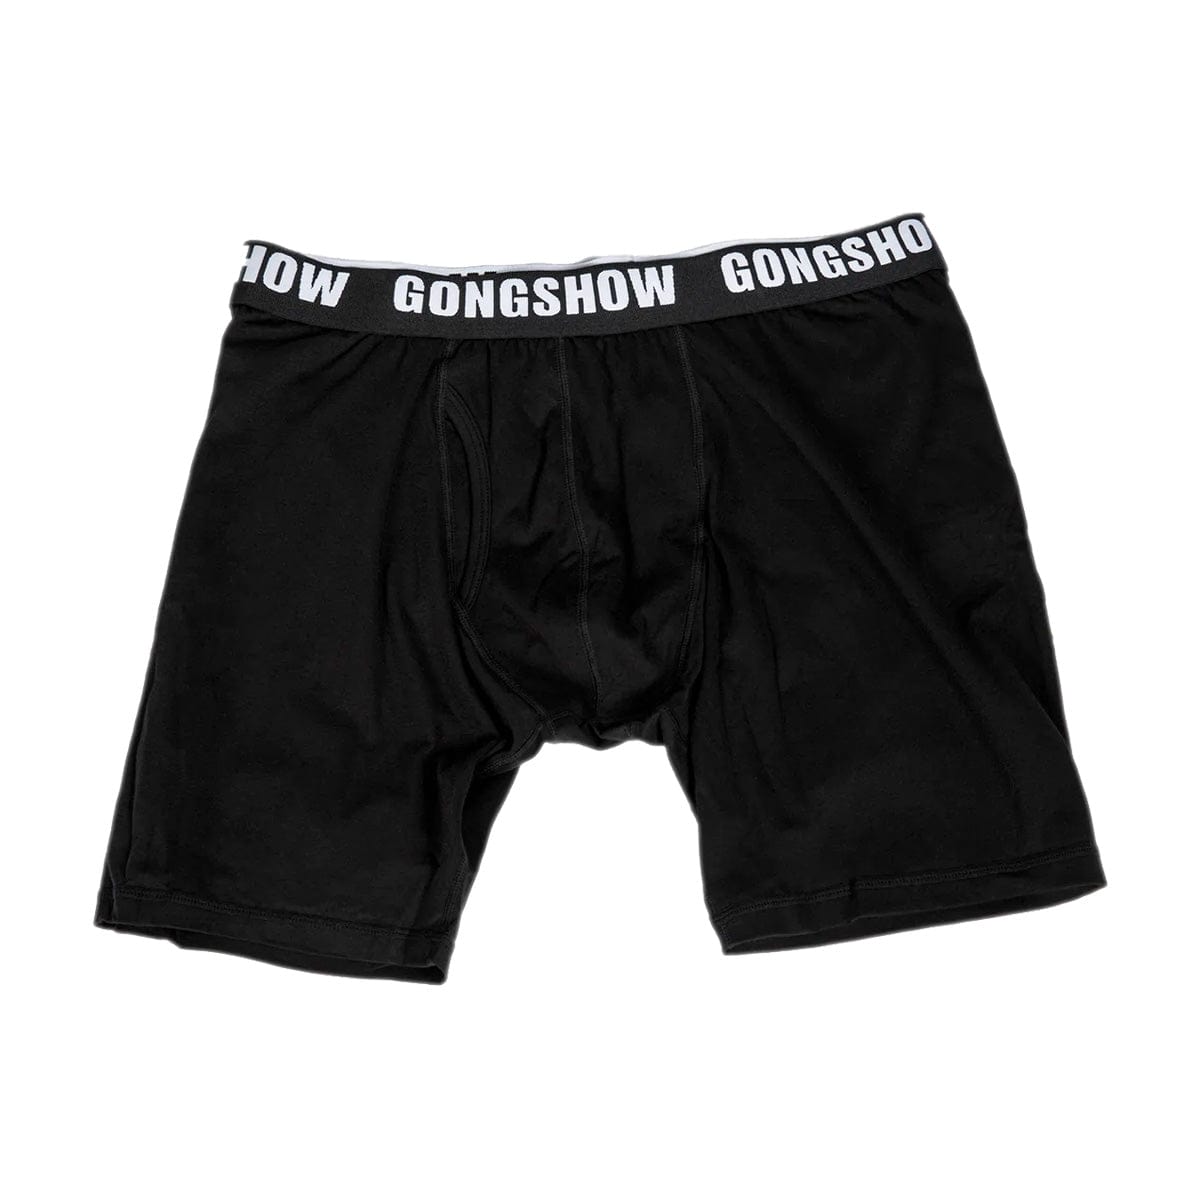 Gongshow Hockey Natty Boxers - 3 Pack - The Hockey Shop Source For Sports